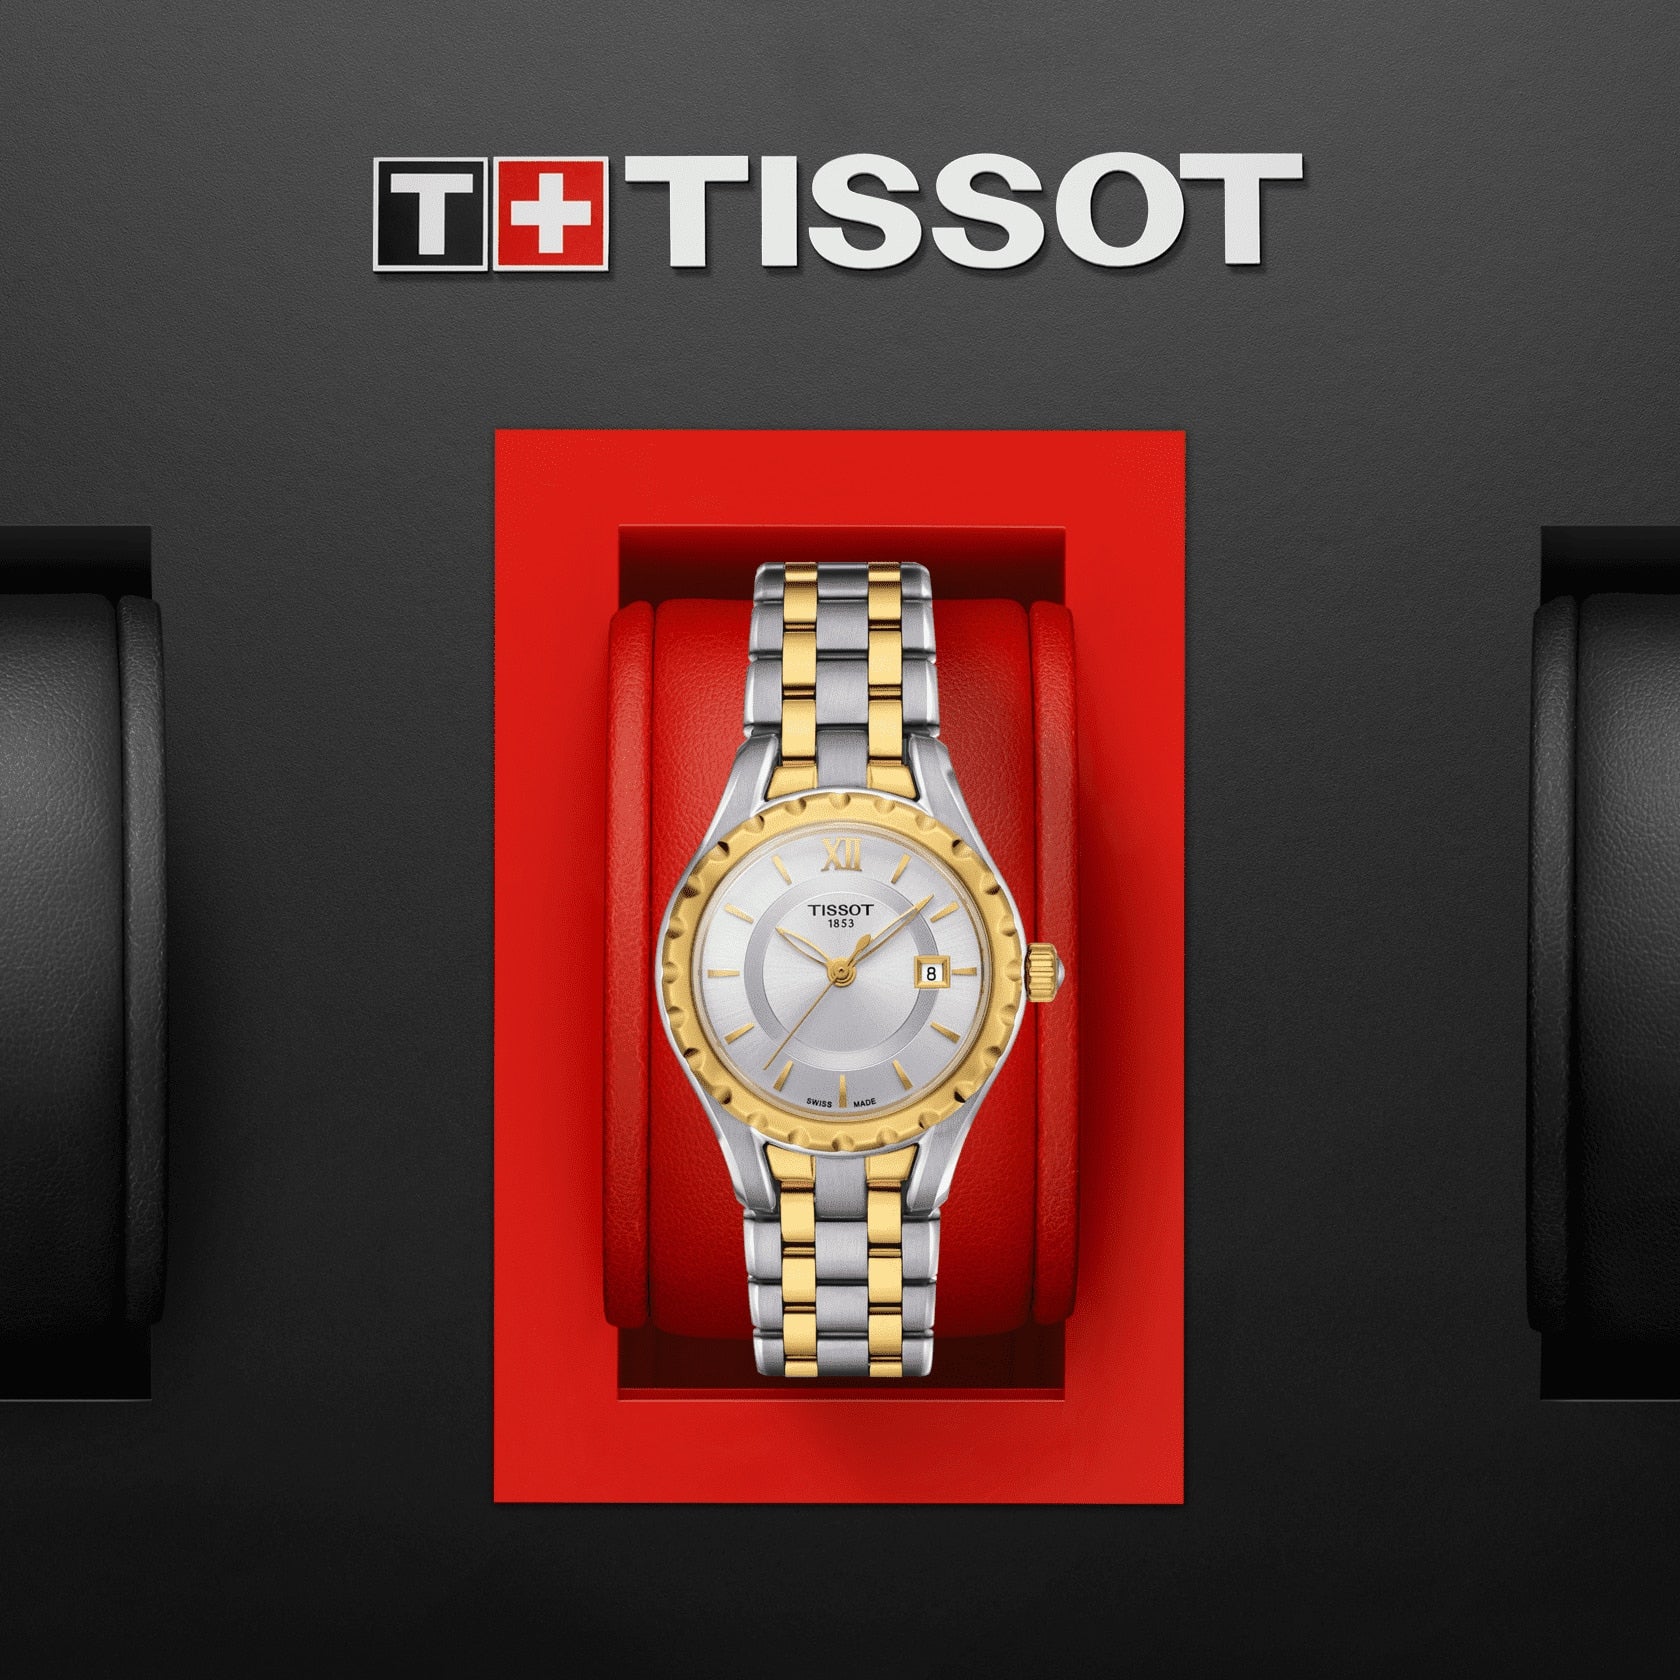 Tissot Swiss Made T-Classic Small Lady 2 Tone Gold Plated Stainless Steel Ladies' Watch T0720102203800 - Prestige